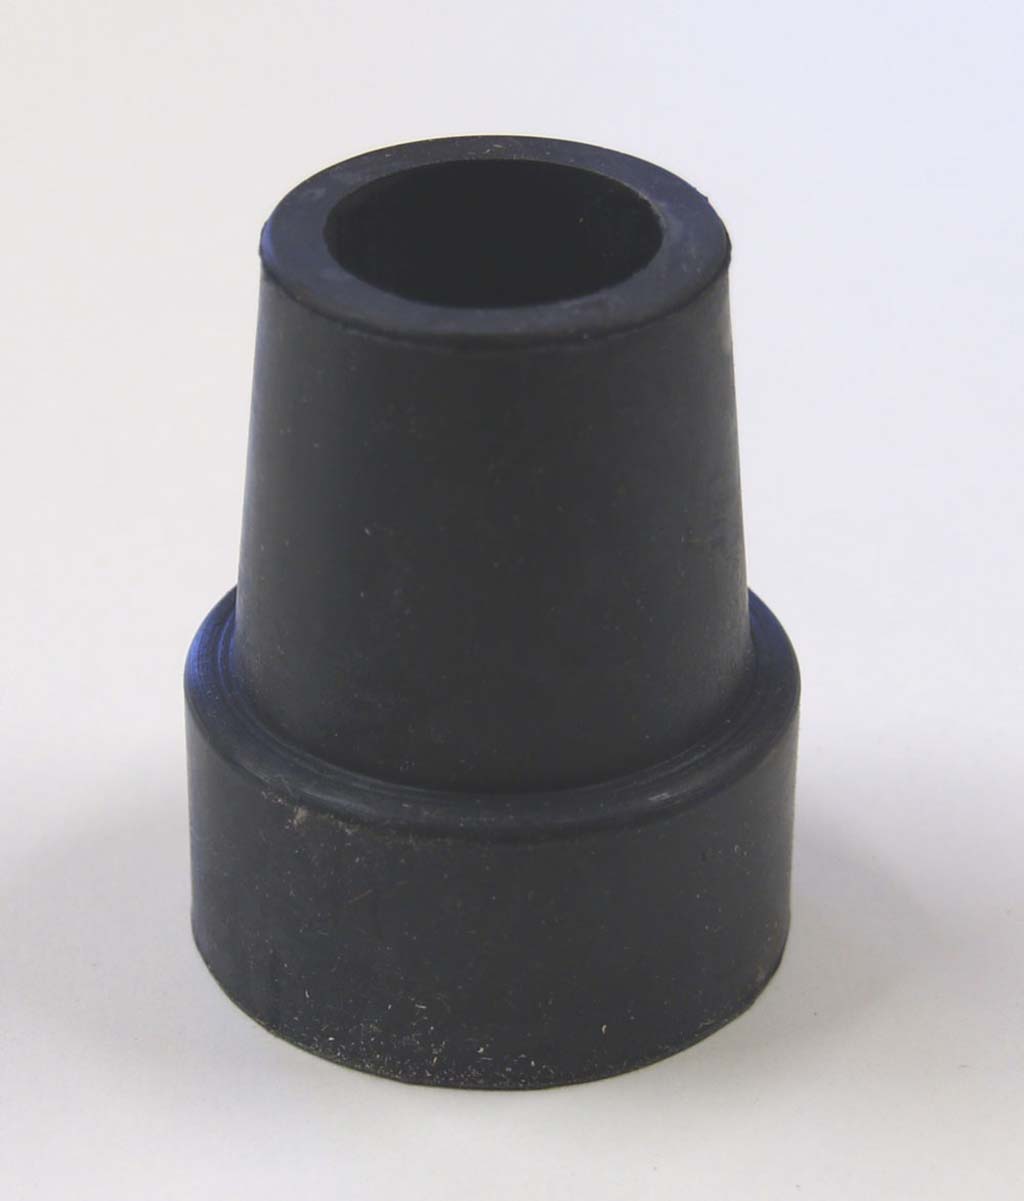 Ferrule- black heavy duty rubber- fits to 28mm. fiber glass leg for orange and red ACTOY stilts.